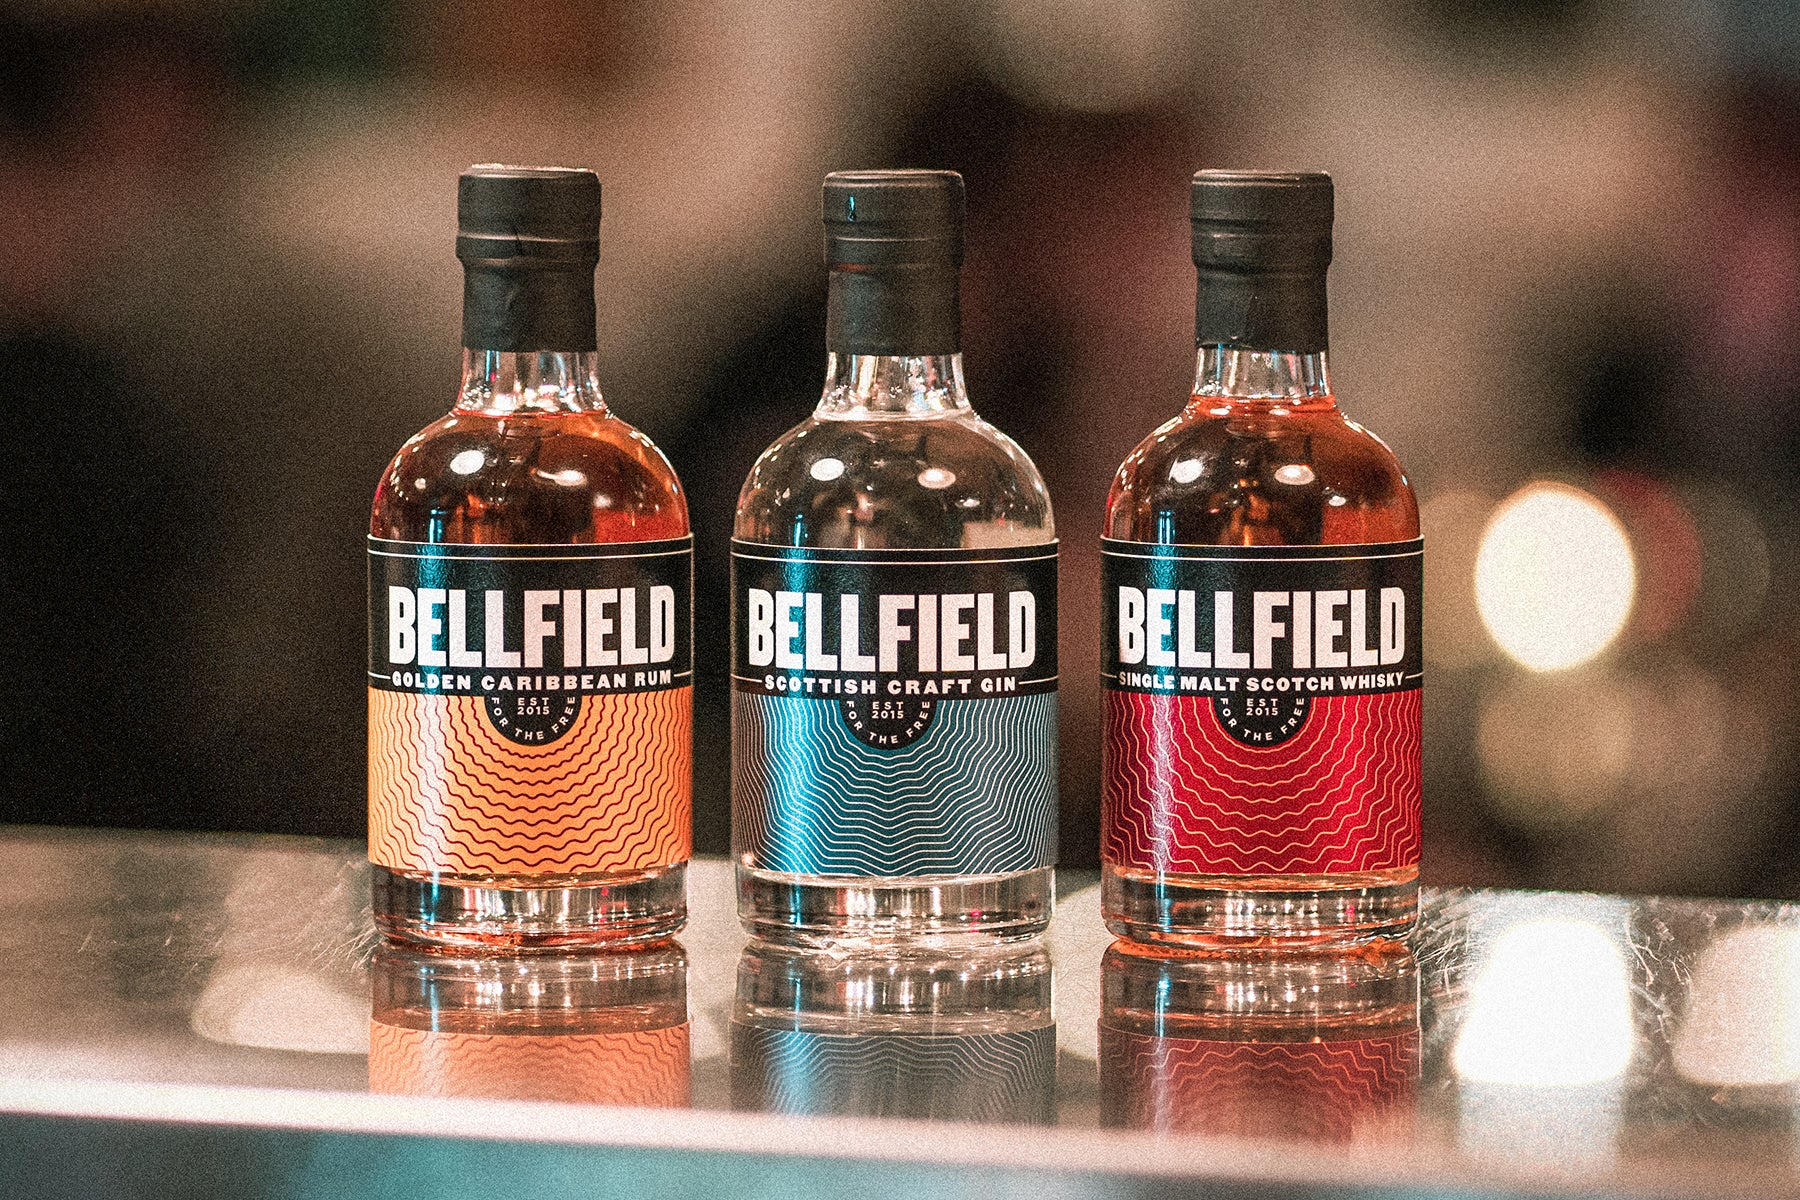 Bellfield's in-house Spirits – Gin, Rum and Whisky – limited edition for Christmas